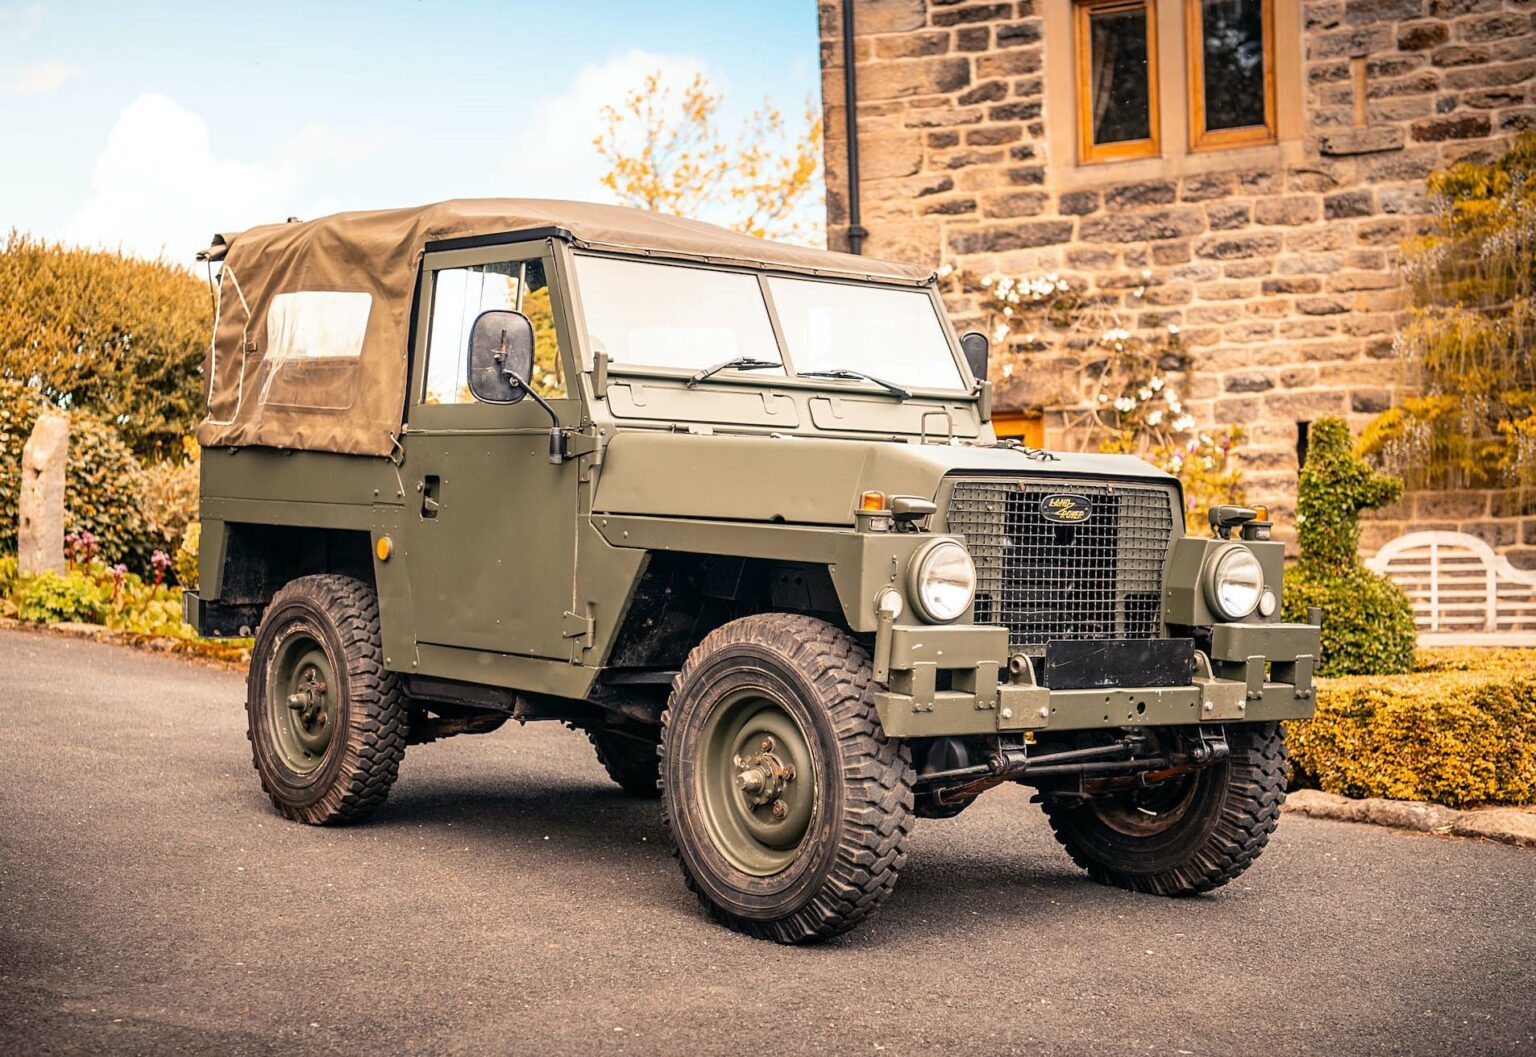 The Unusual Land Rover Lightweight Series 3